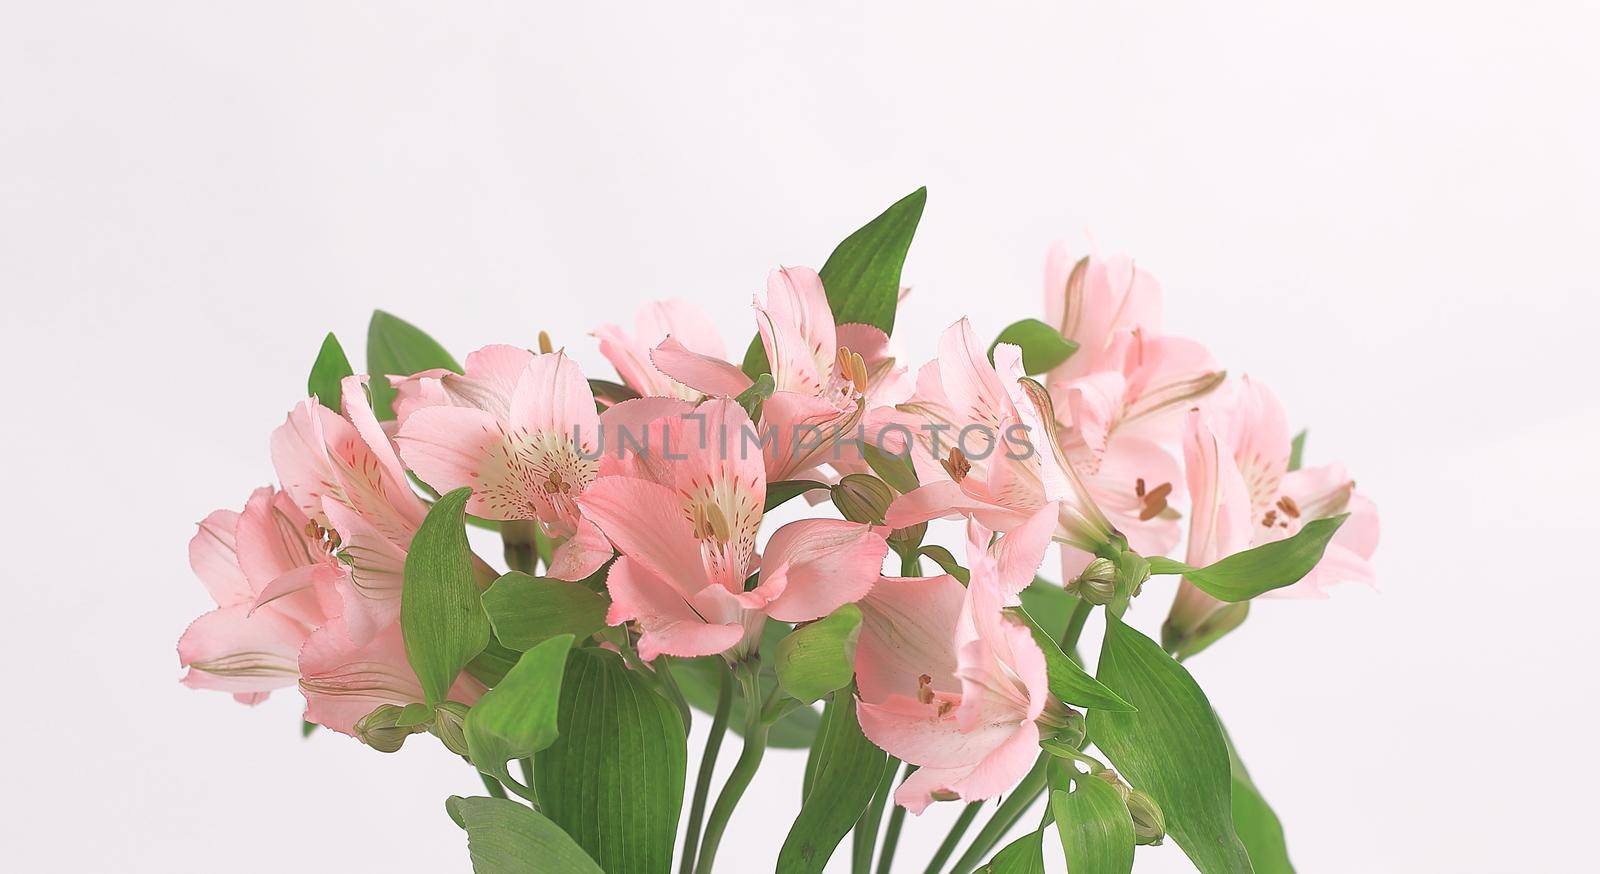 bouquet of flowers isolated on a light background.flowers to set the mood